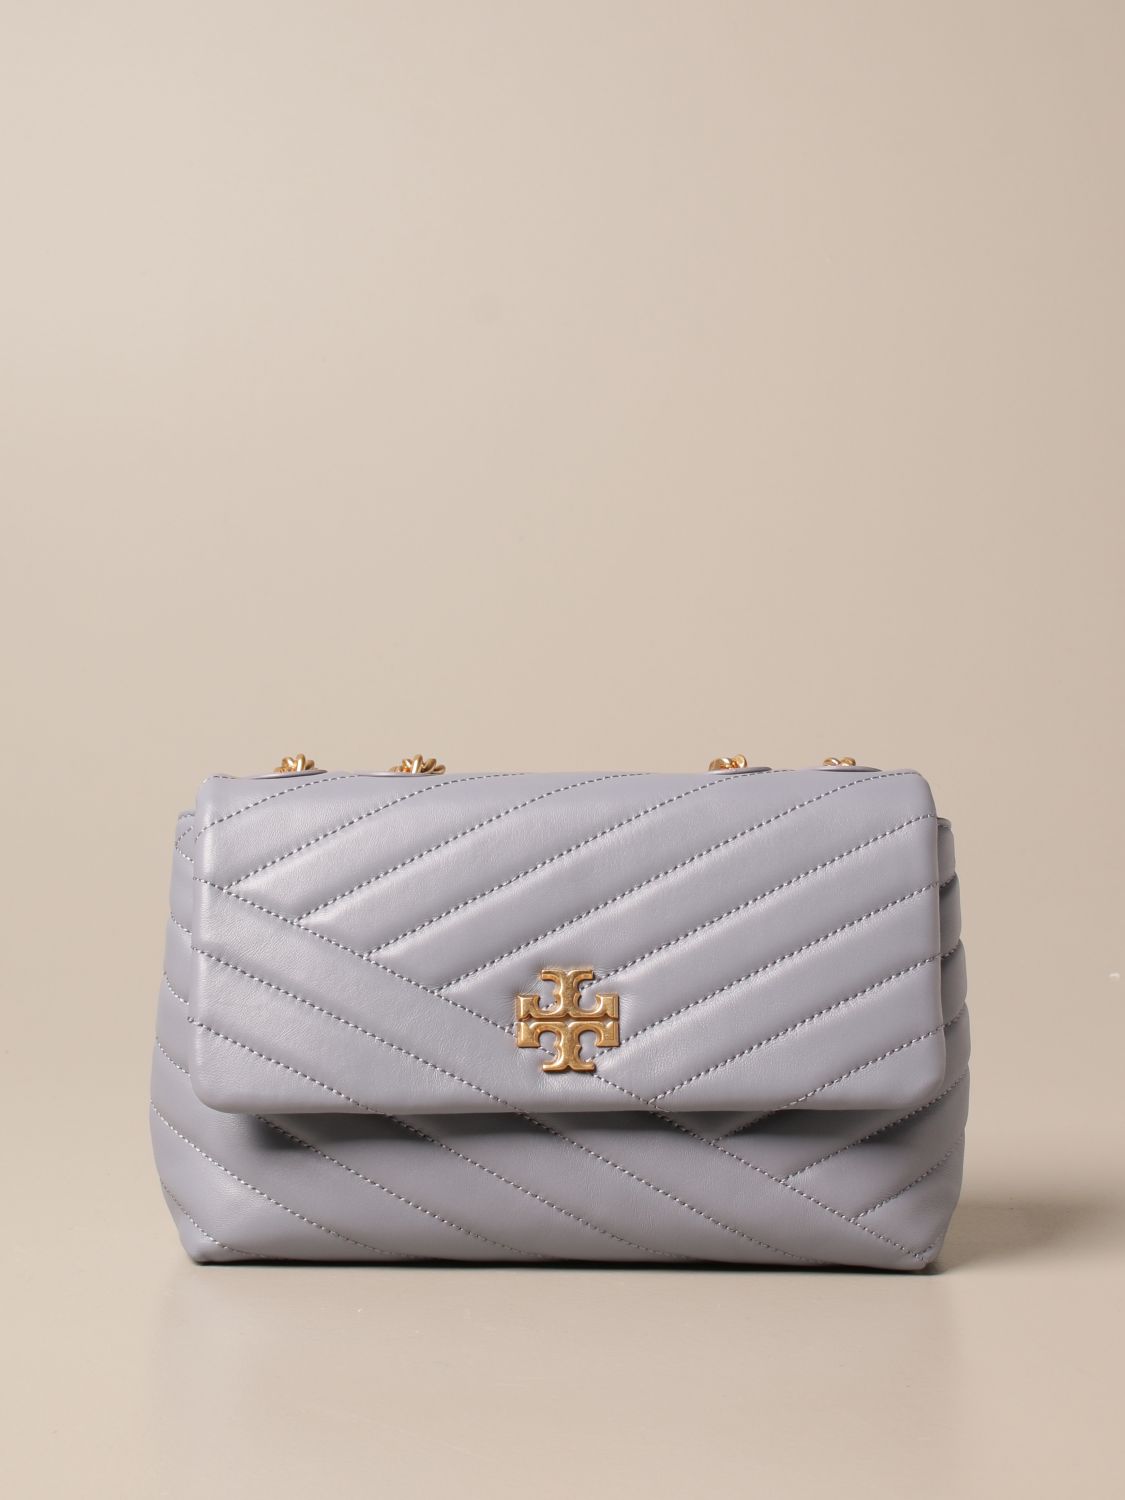 TORY BURCH: Kira bag in quilted leather - Dust | Tory Burch crossbody bags  64963 online on 